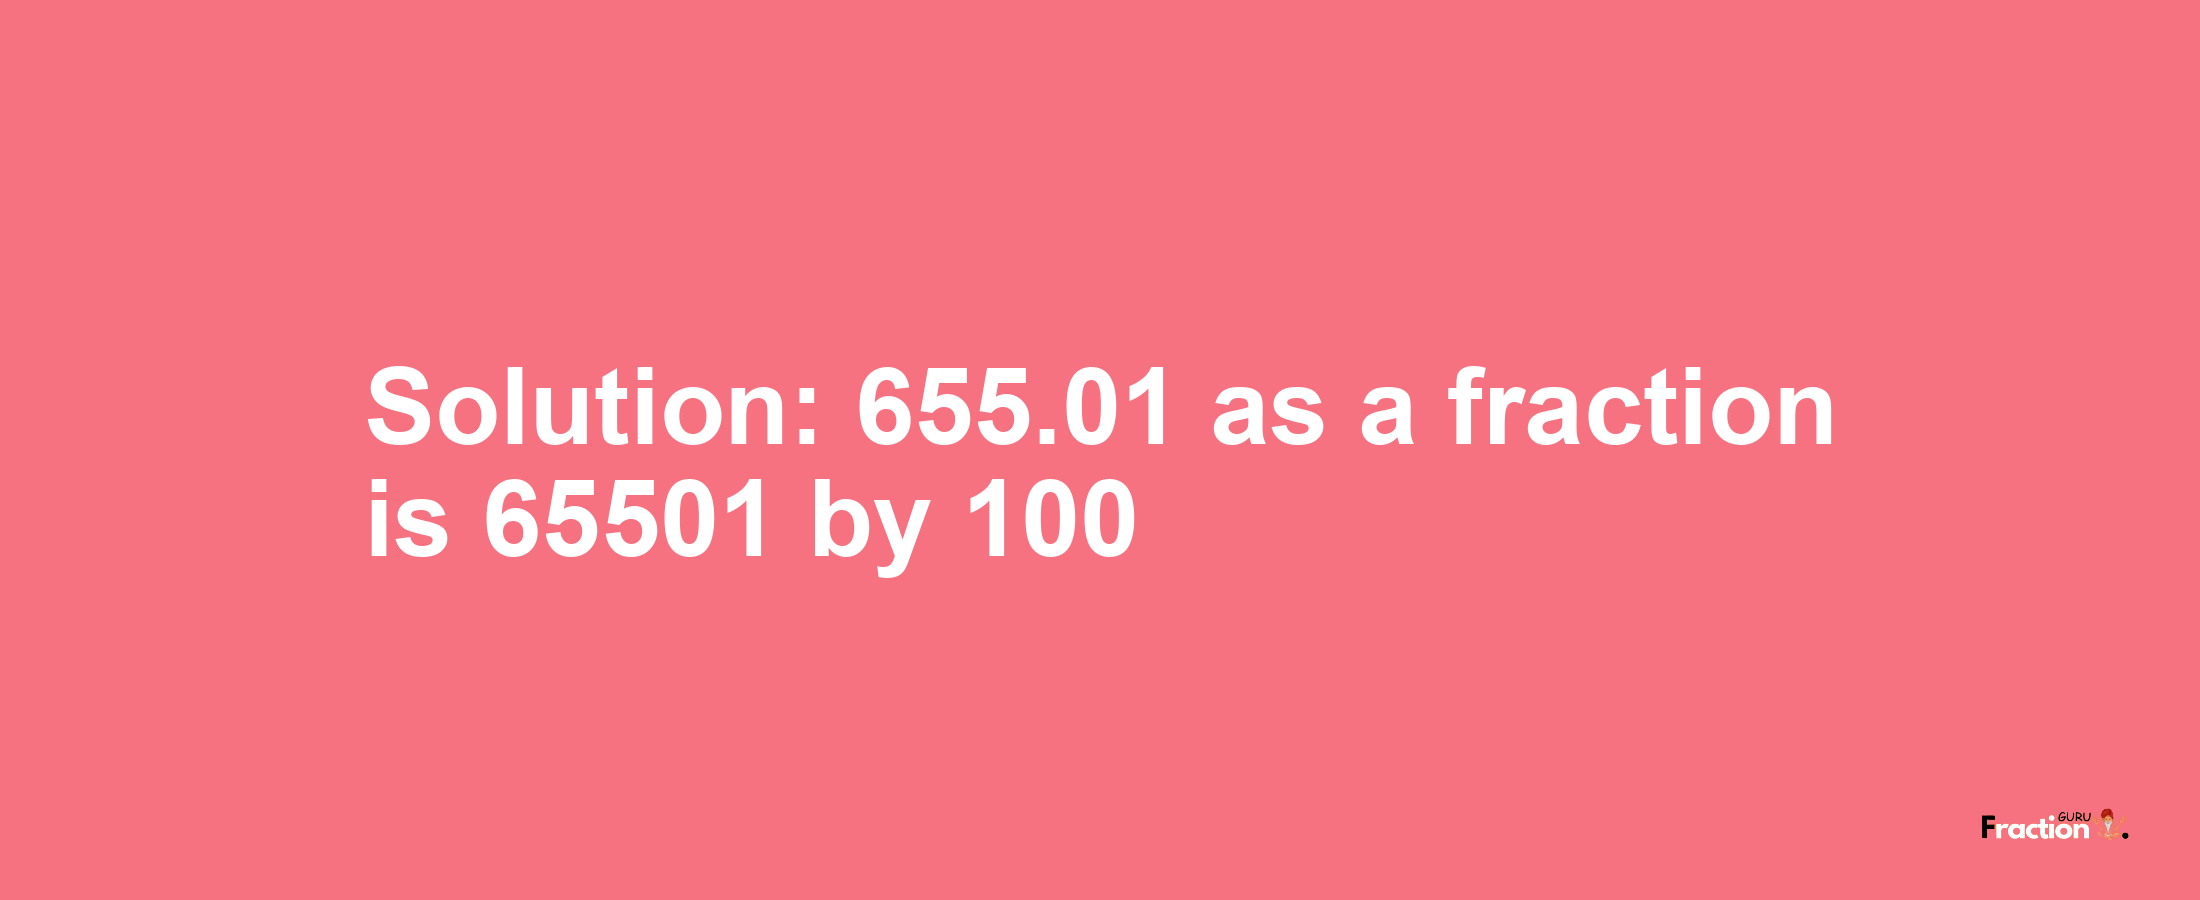 Solution:655.01 as a fraction is 65501/100